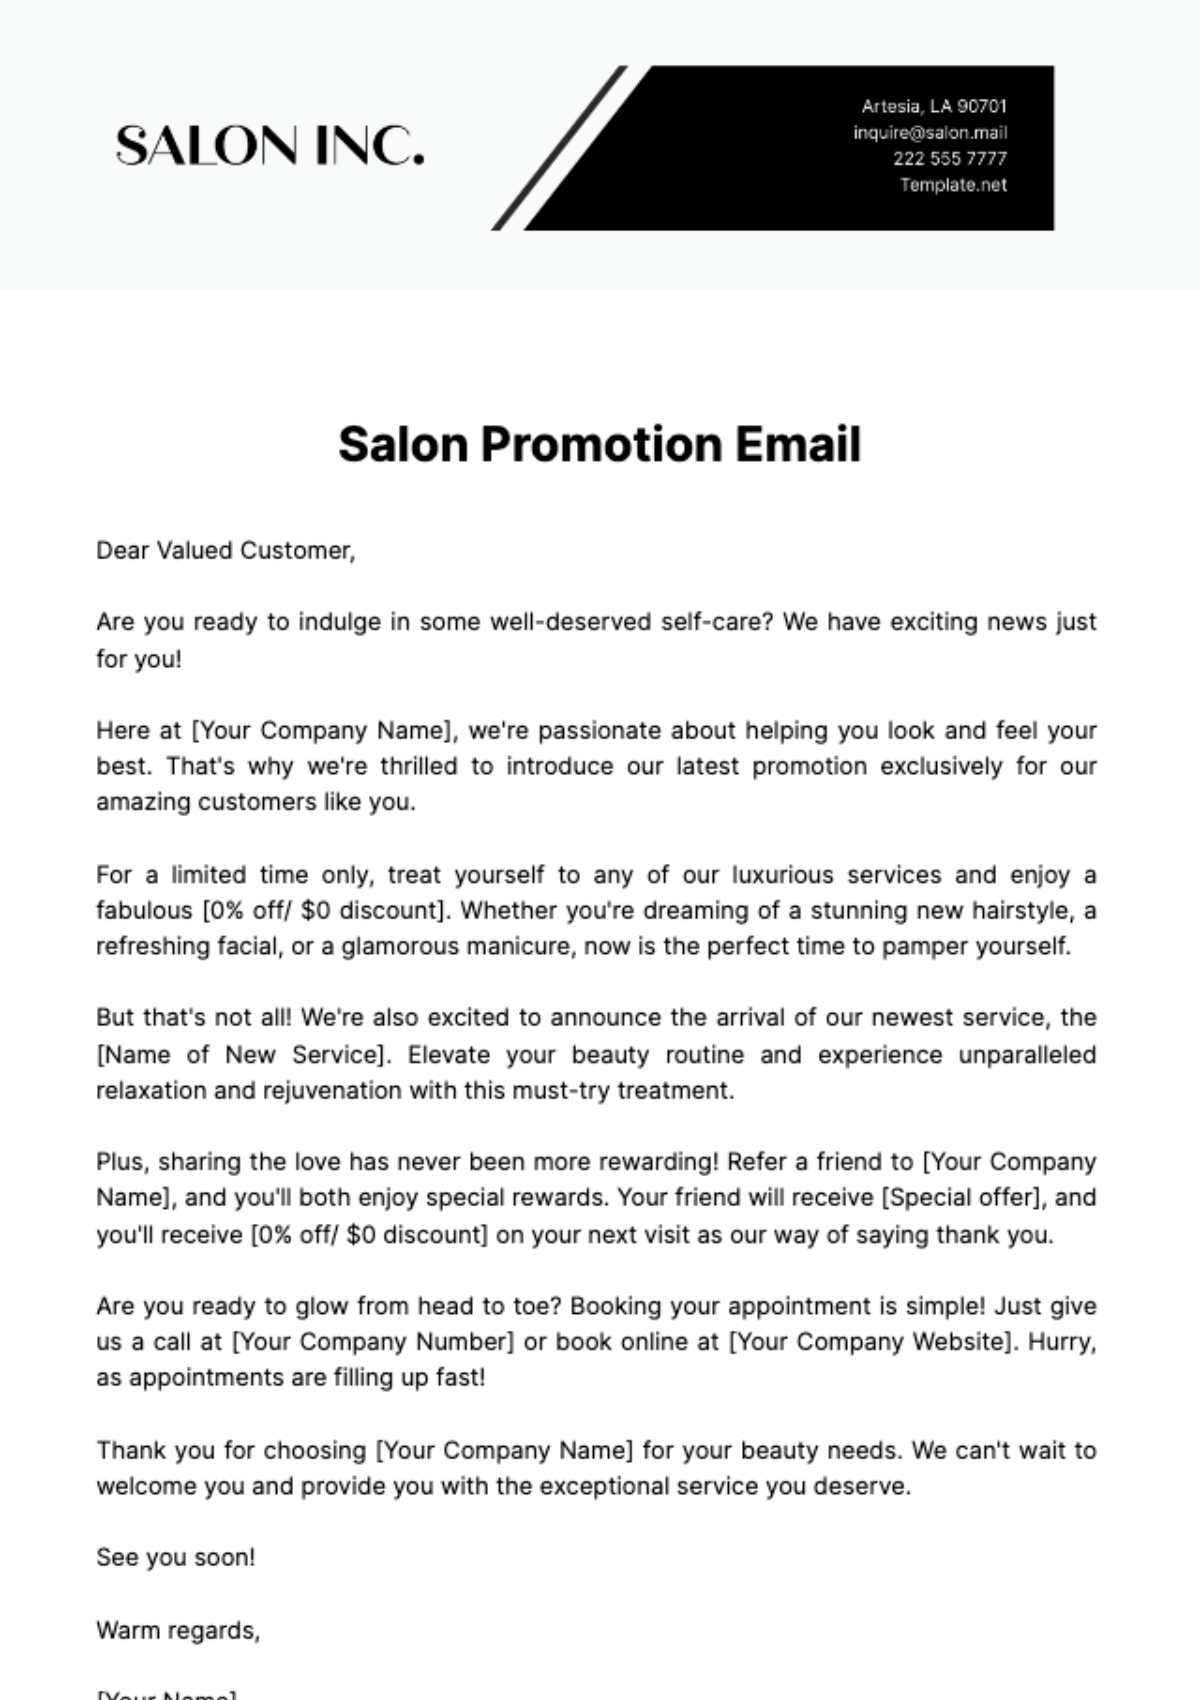 Free Salon Promotion Email Template